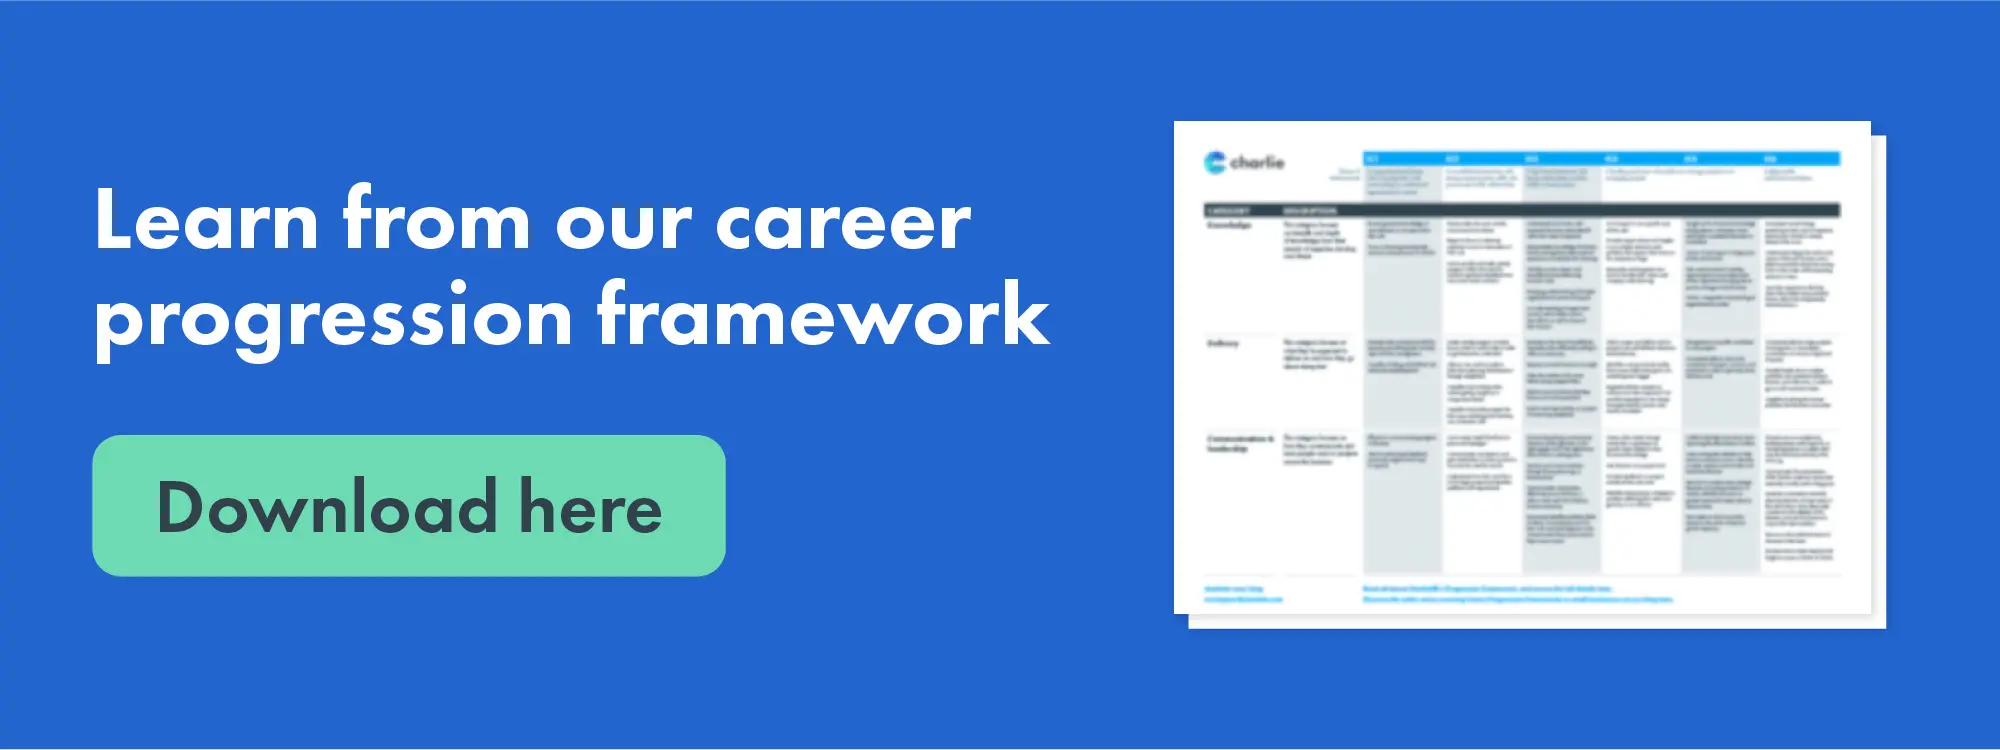 Learn from our career progression framework click here